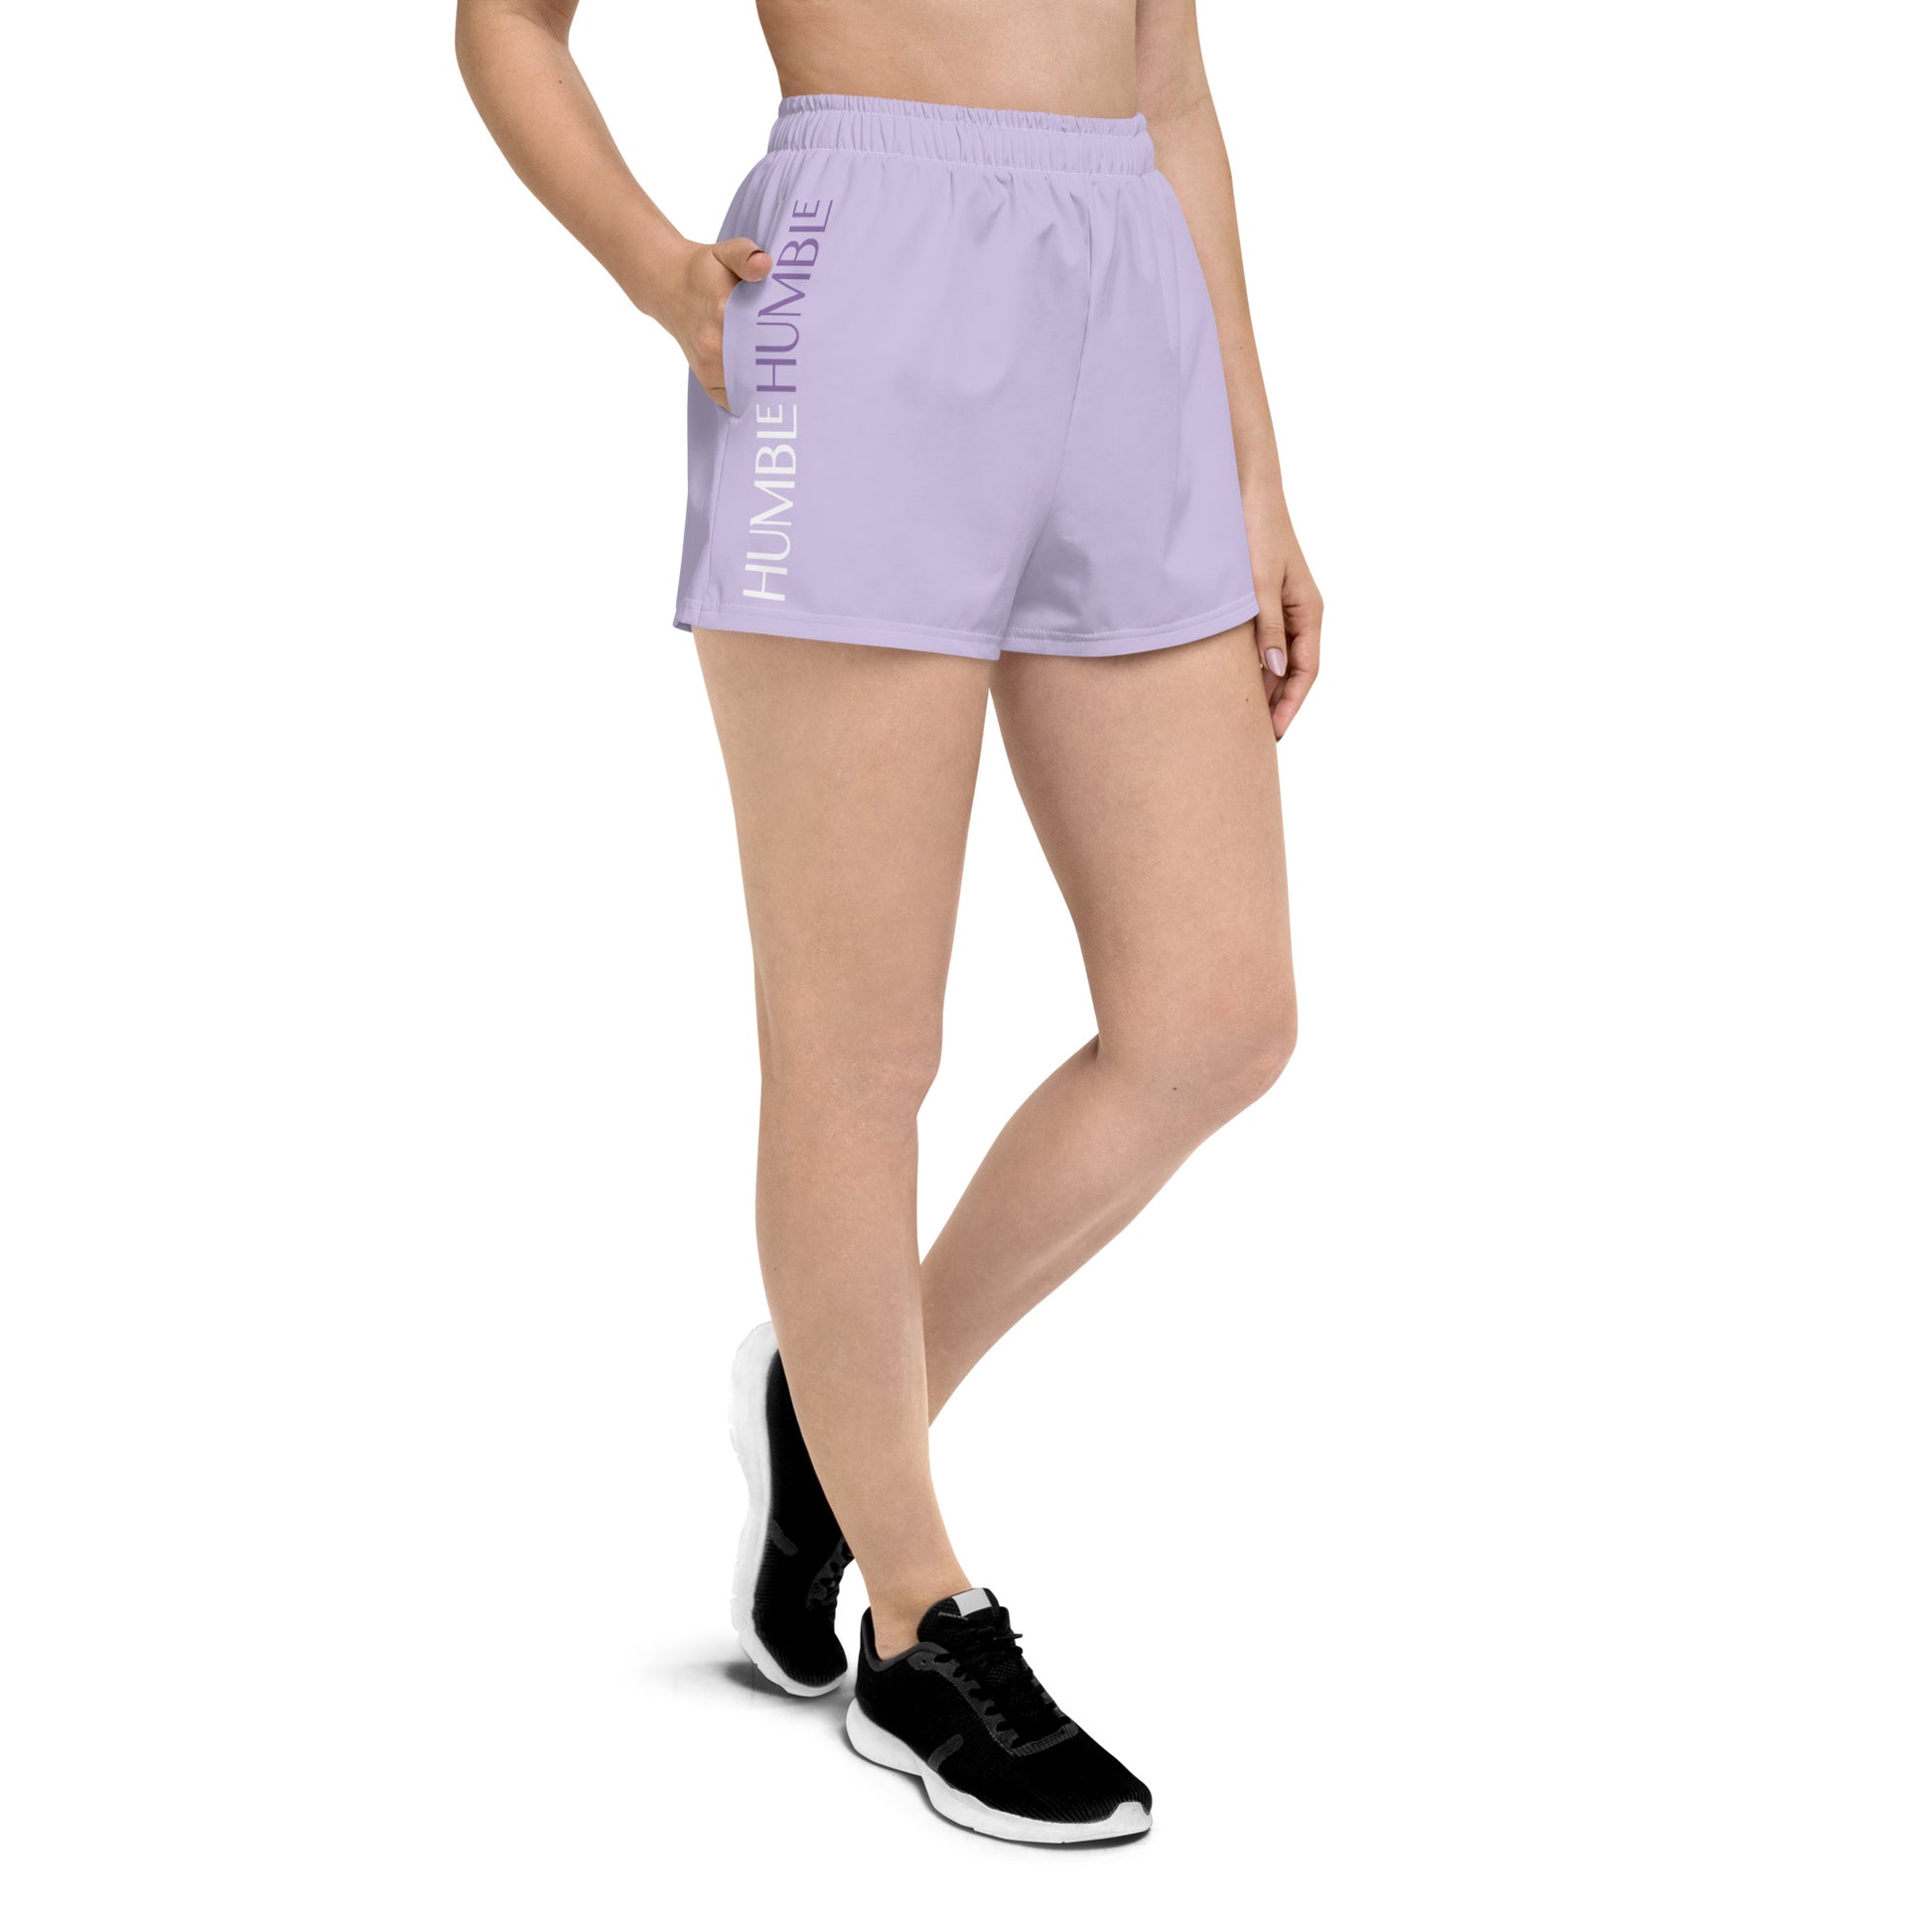 Humble Sportswear, women’s color match shorts, athletic shorts